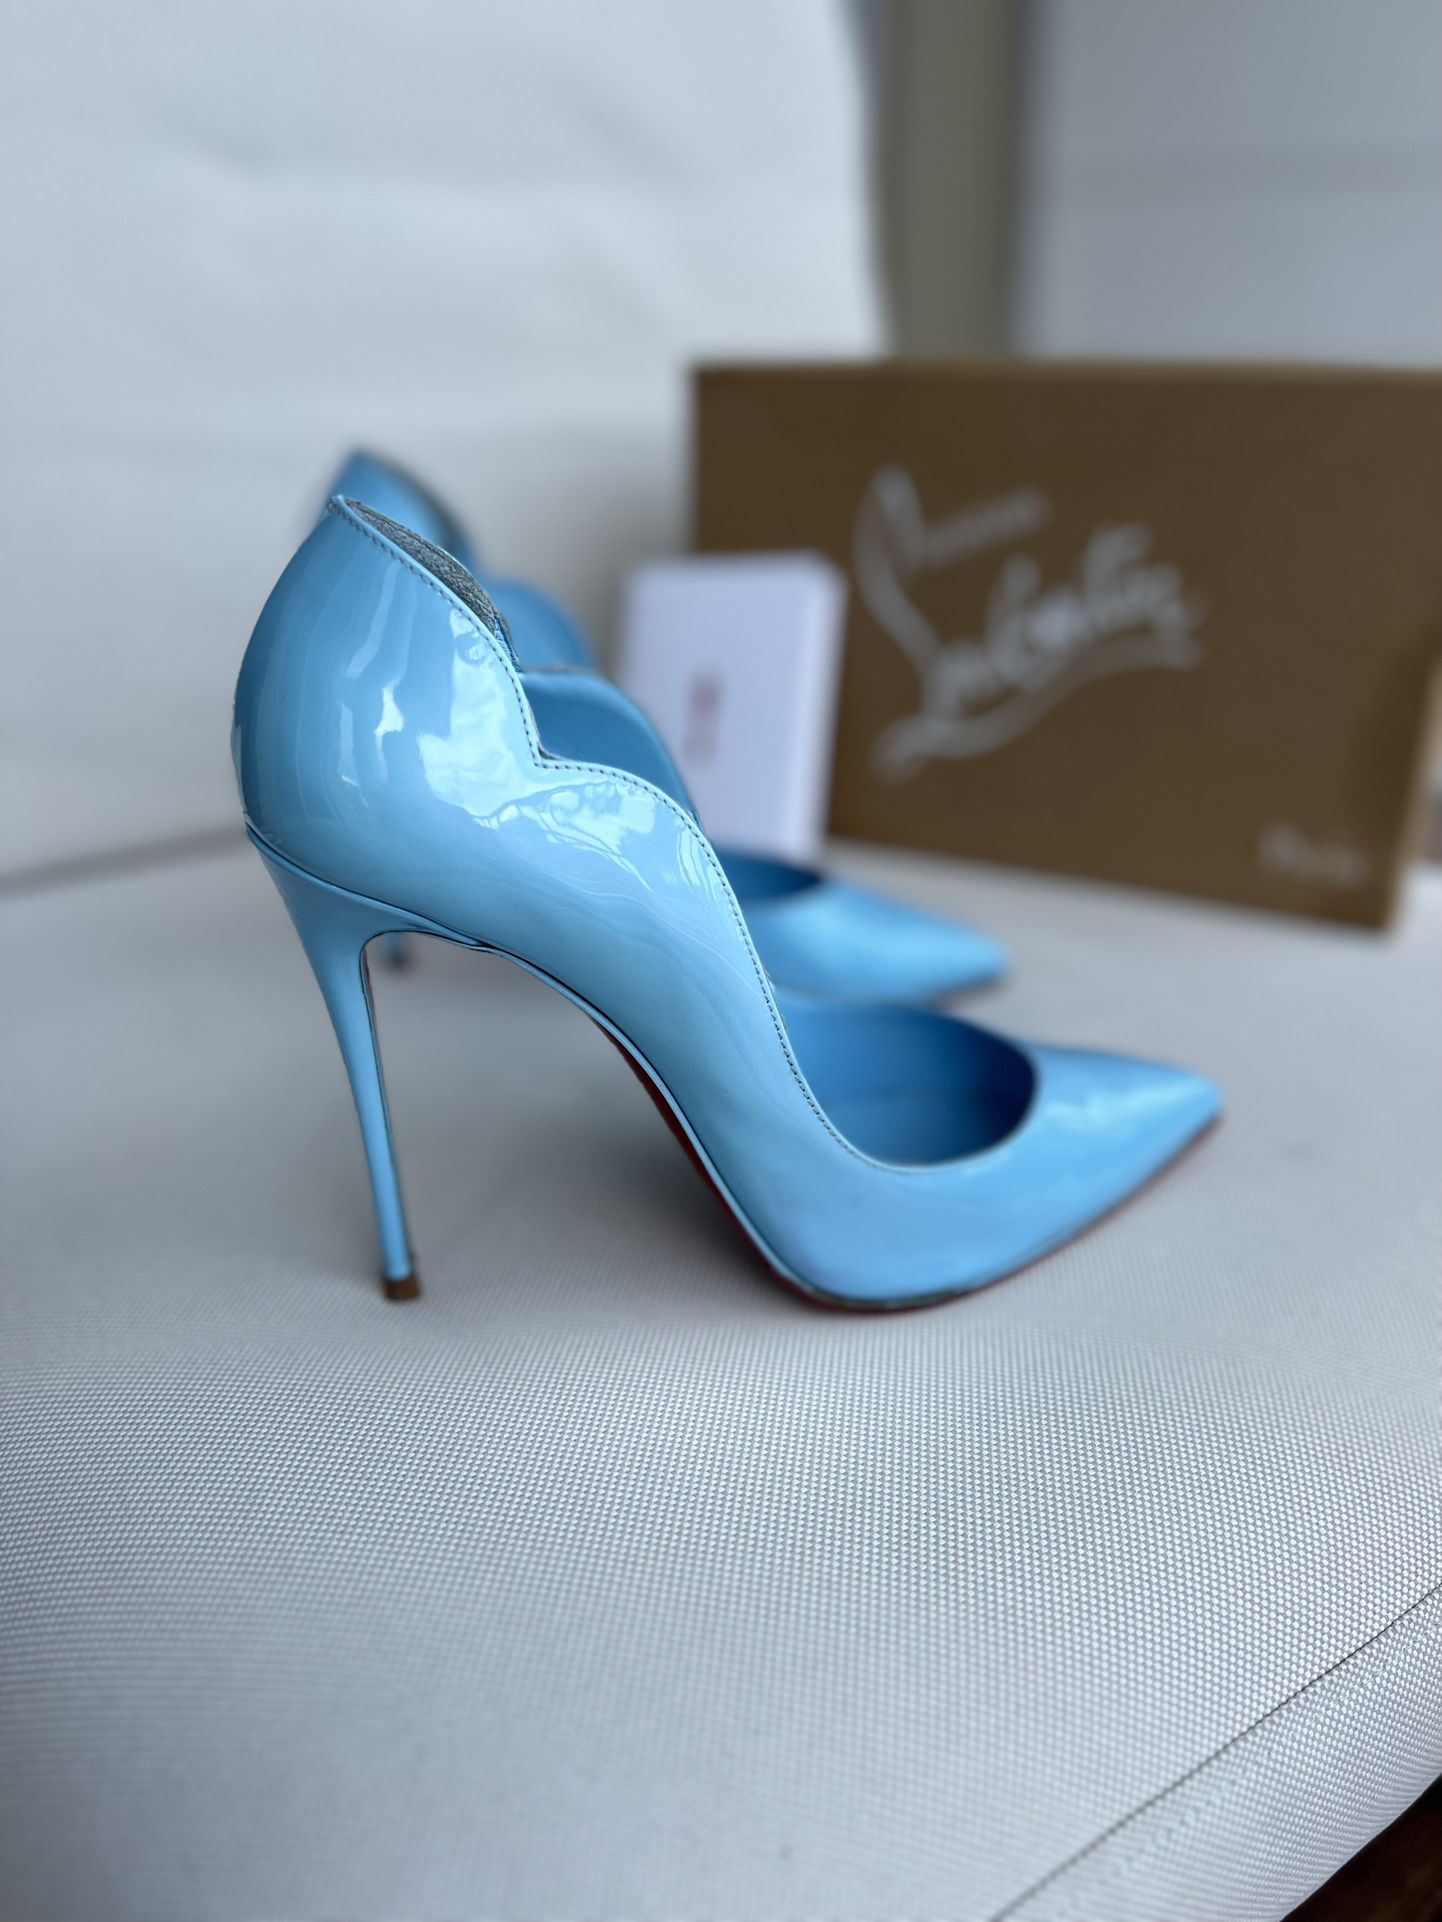 Christian Louboutin Designer Heels for Sale in Dade City, FL - OfferUp